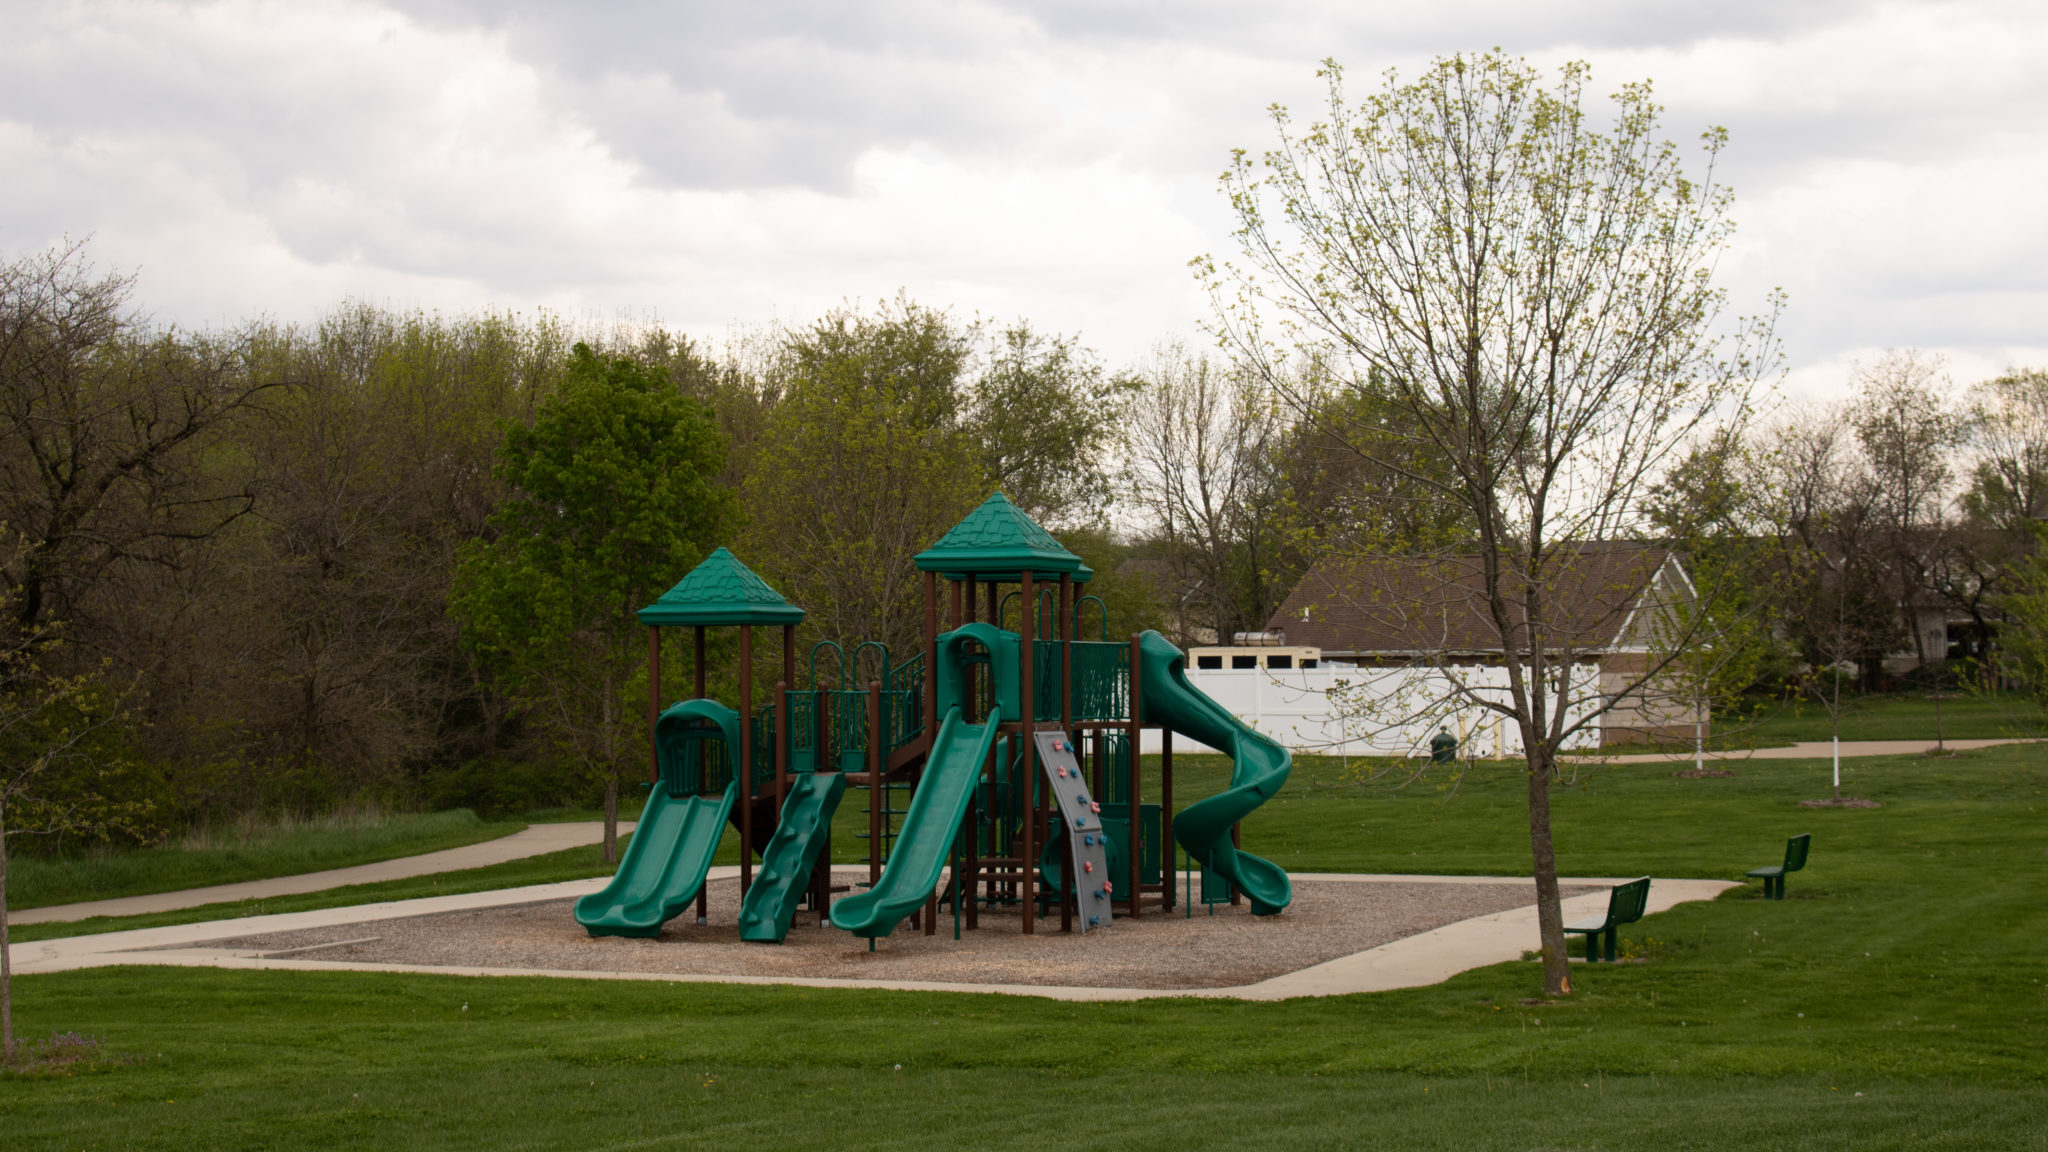 Best Parks in Story City, IA